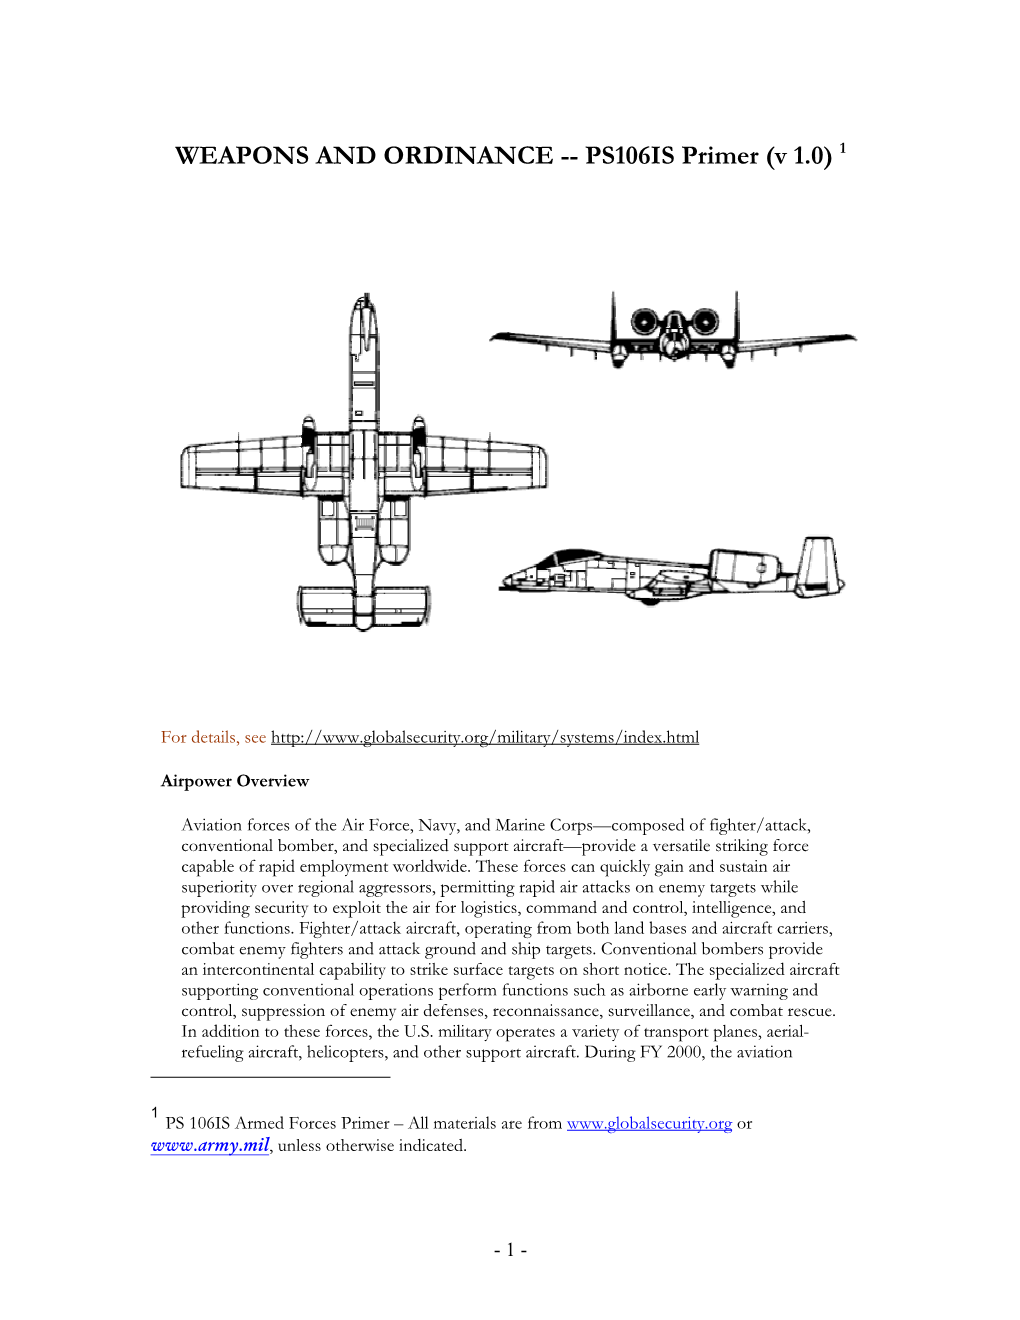 WEAPONS and ORDINANCE -- PS106IS Primer (V 1.0) 1